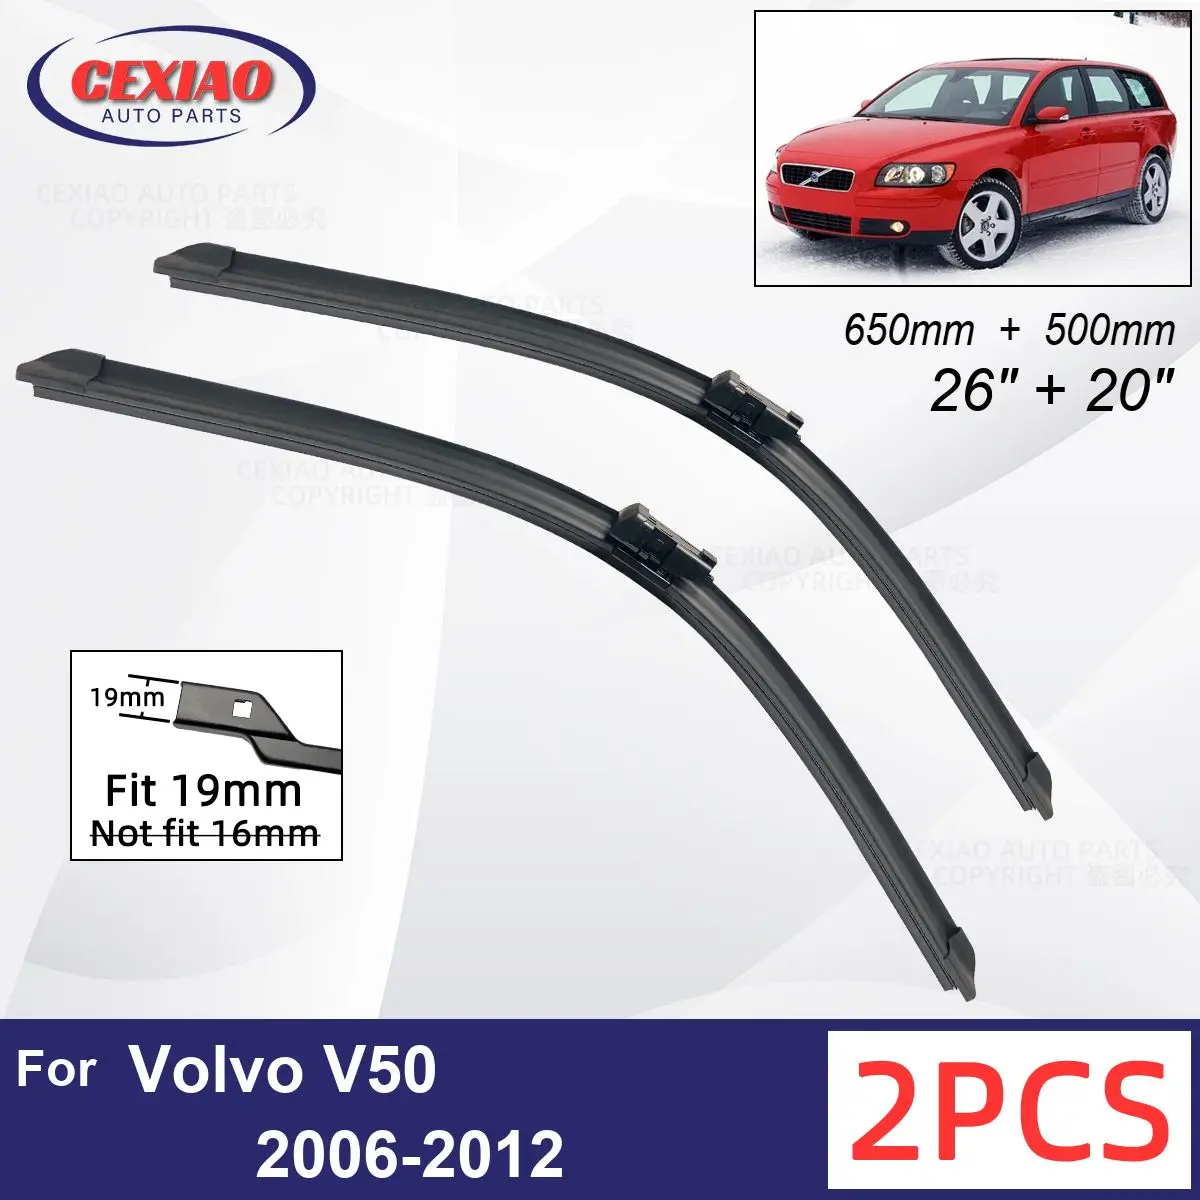 

Car Wiper For Volvo V50 2006-2012 Front Wiper Blades Soft Rubber Windscreen Wipers Auto Windshield 26"+20" 650mm + 500mm